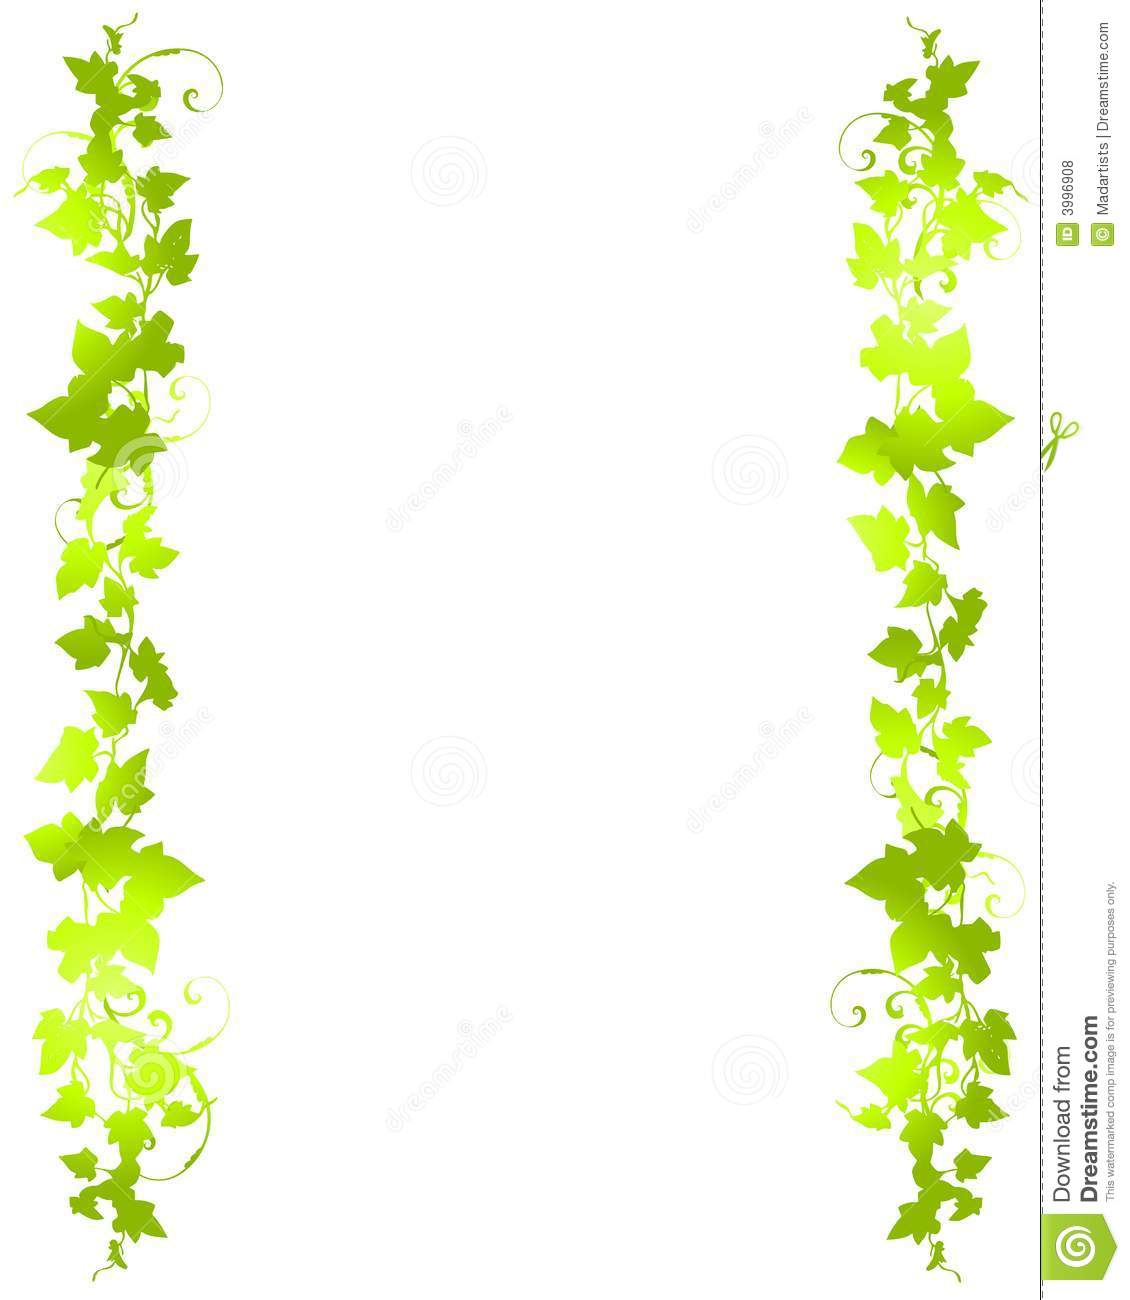 This Free Clip Art Border Vines Is Available Only For Personal Use As